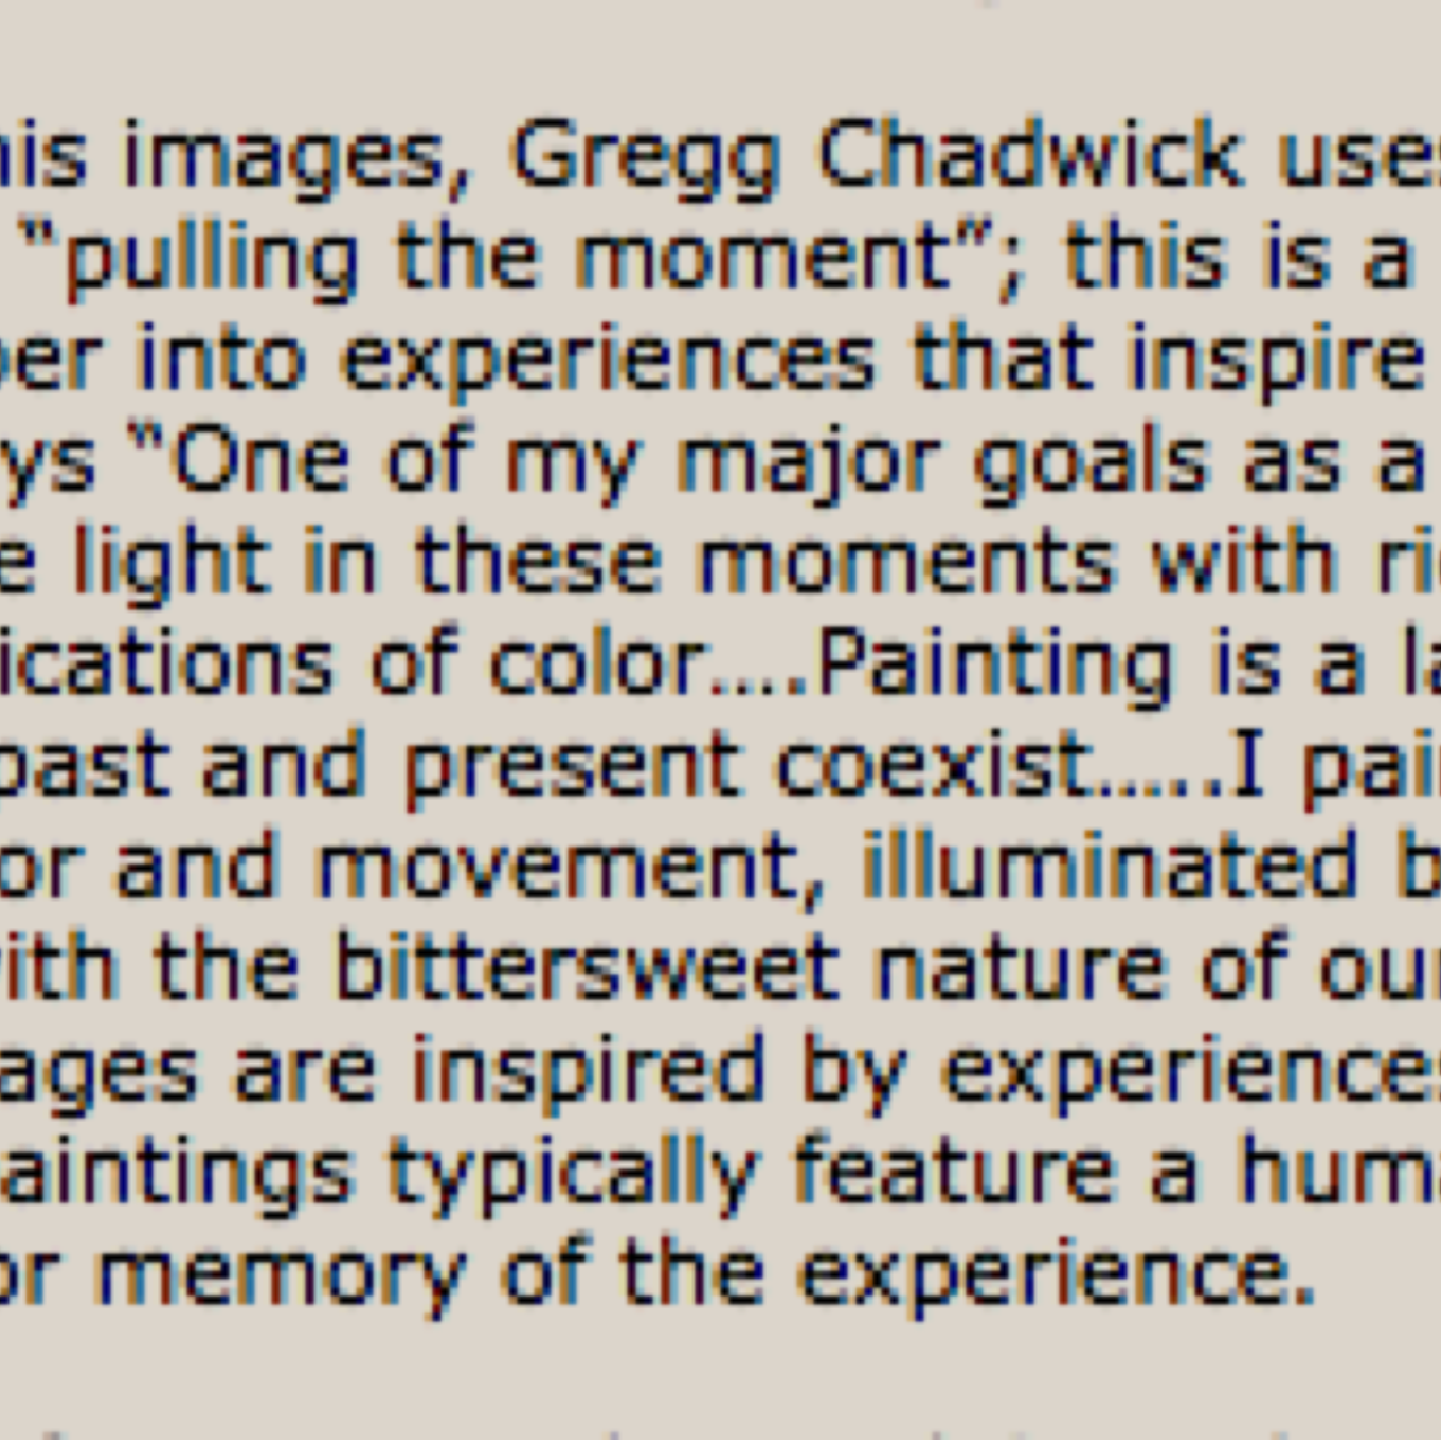 Gregg Chadwick Discusses Time and Memory - SF Guardian, April 2013